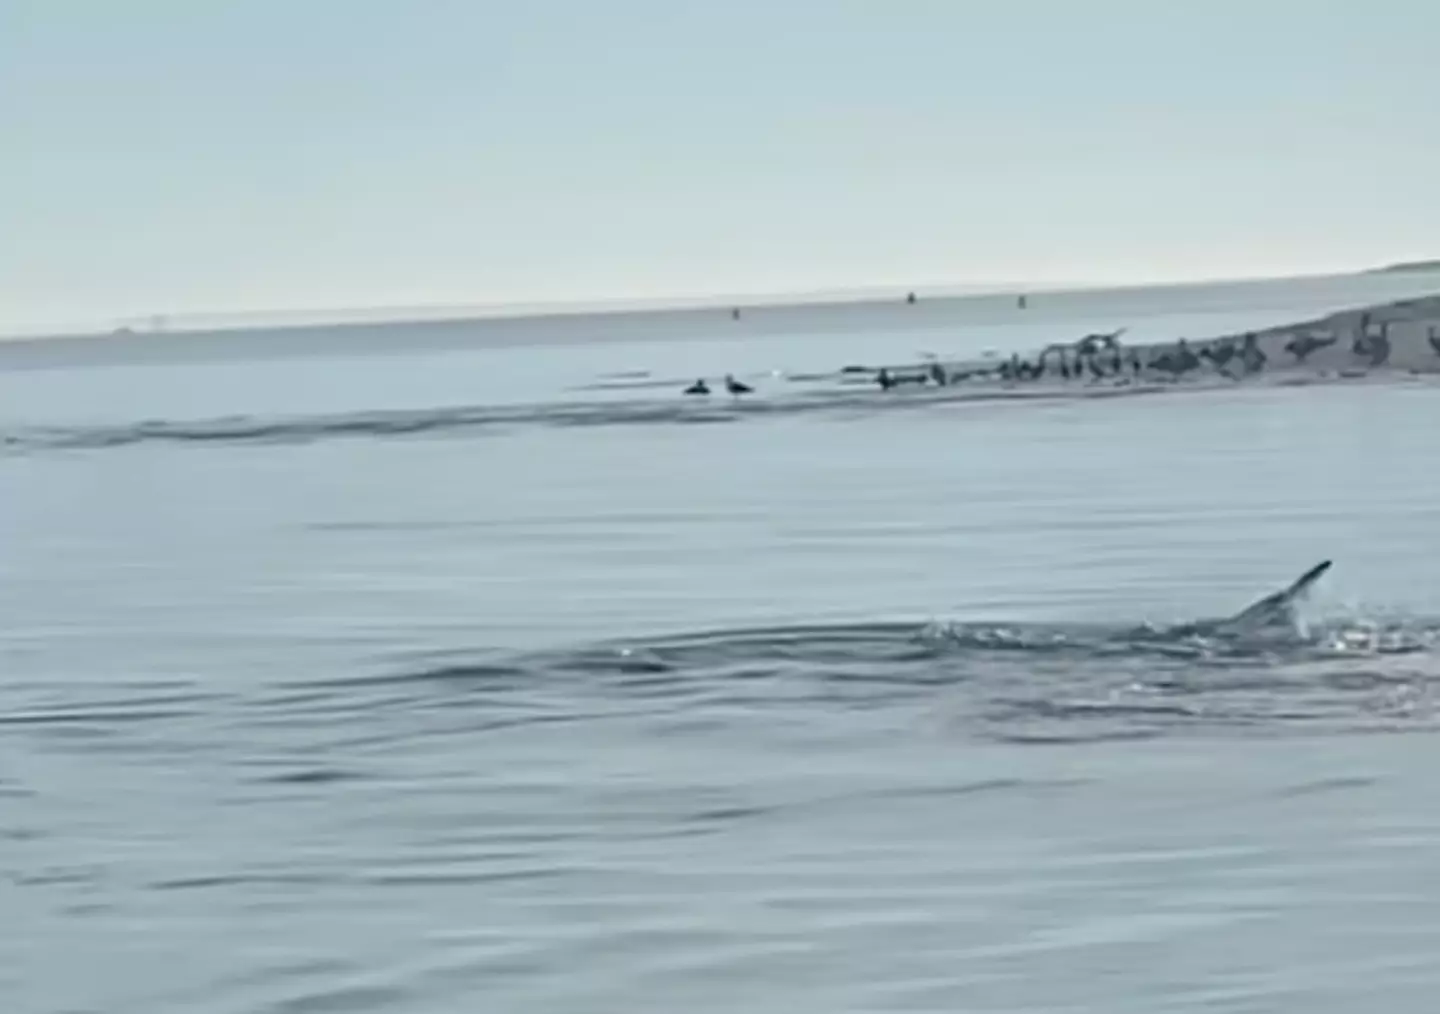 However, other viewers of the footage suggested it's likely a gator, baby whale or seal.